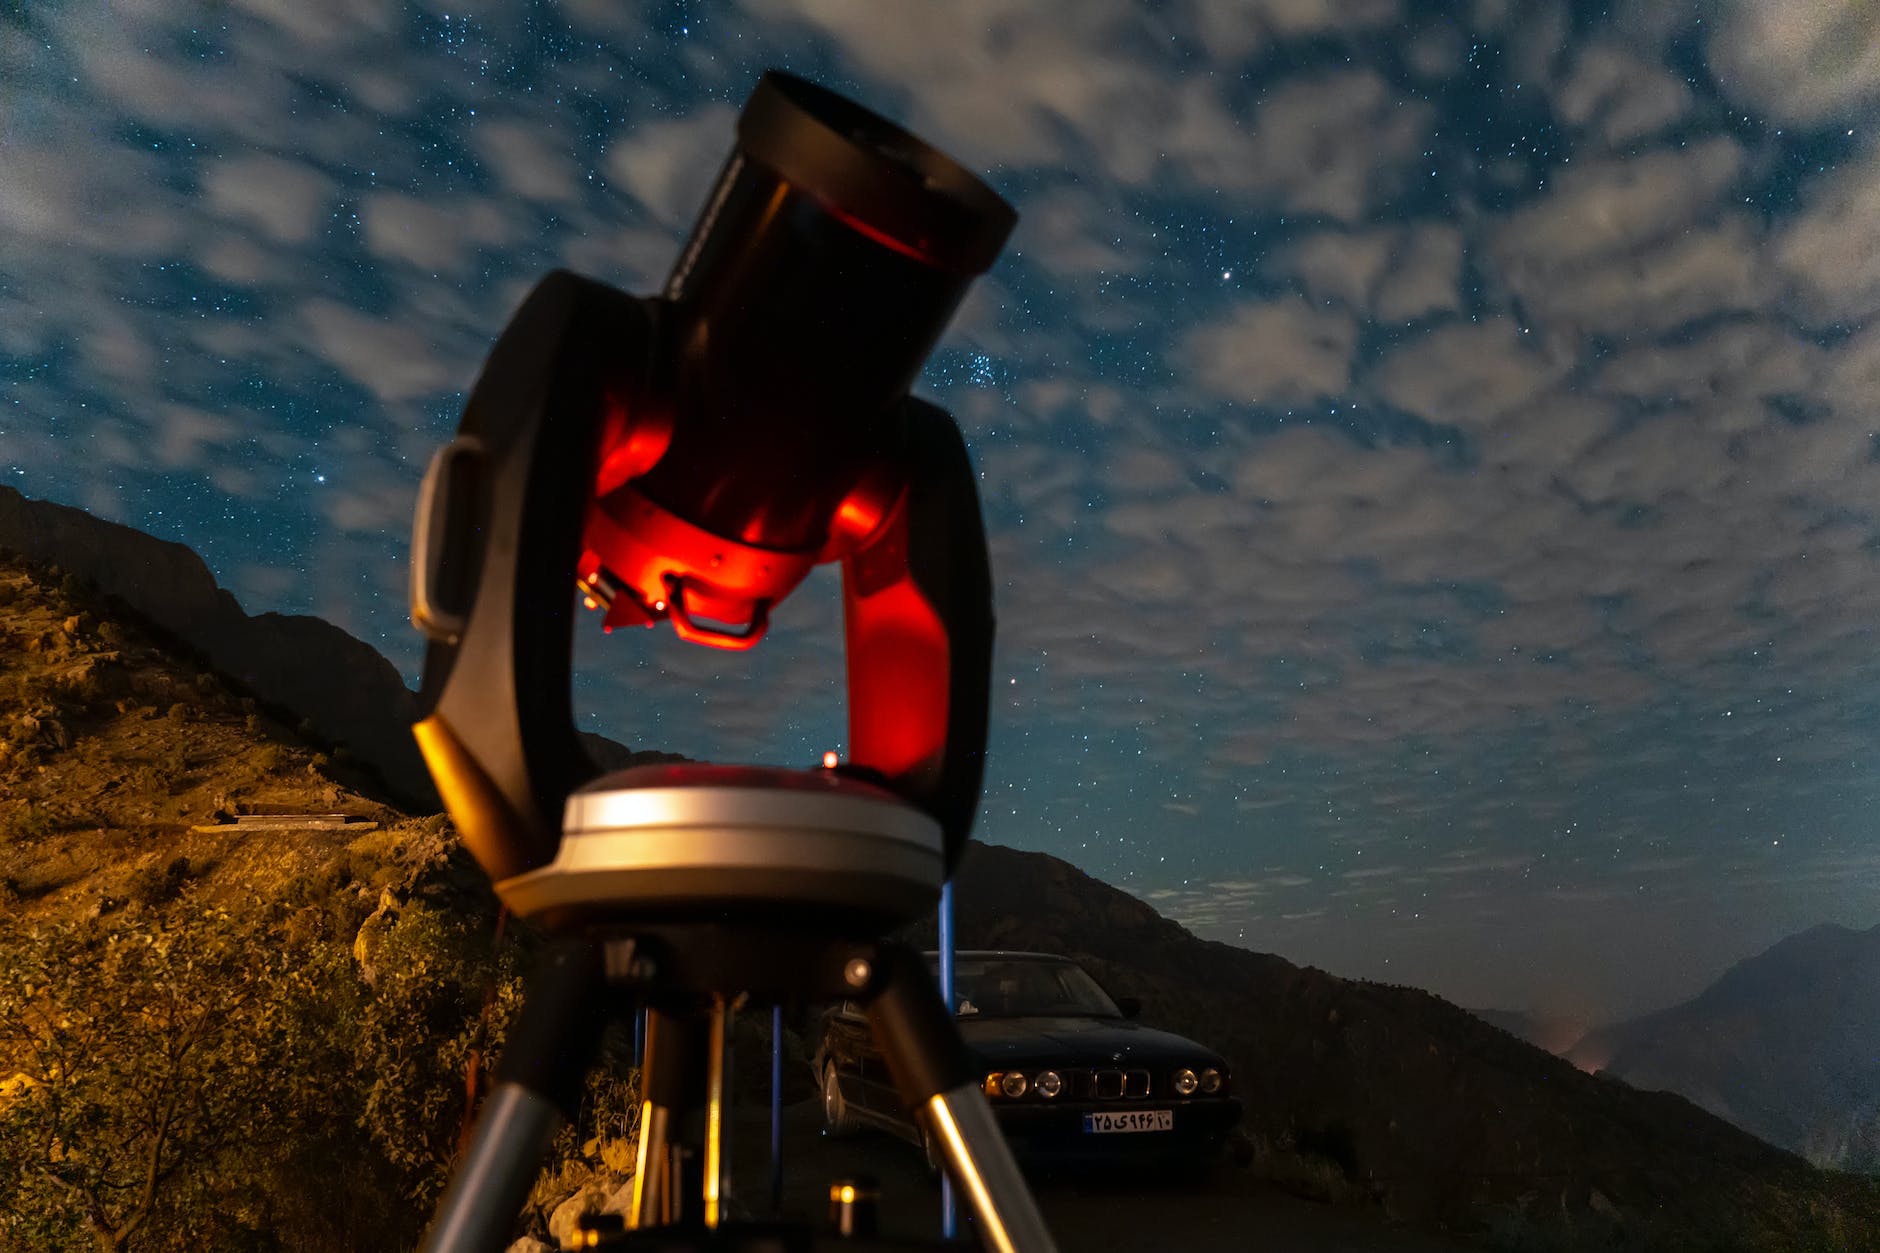 10 Steps to Setting Up and Using Your Telescope Like a Pro